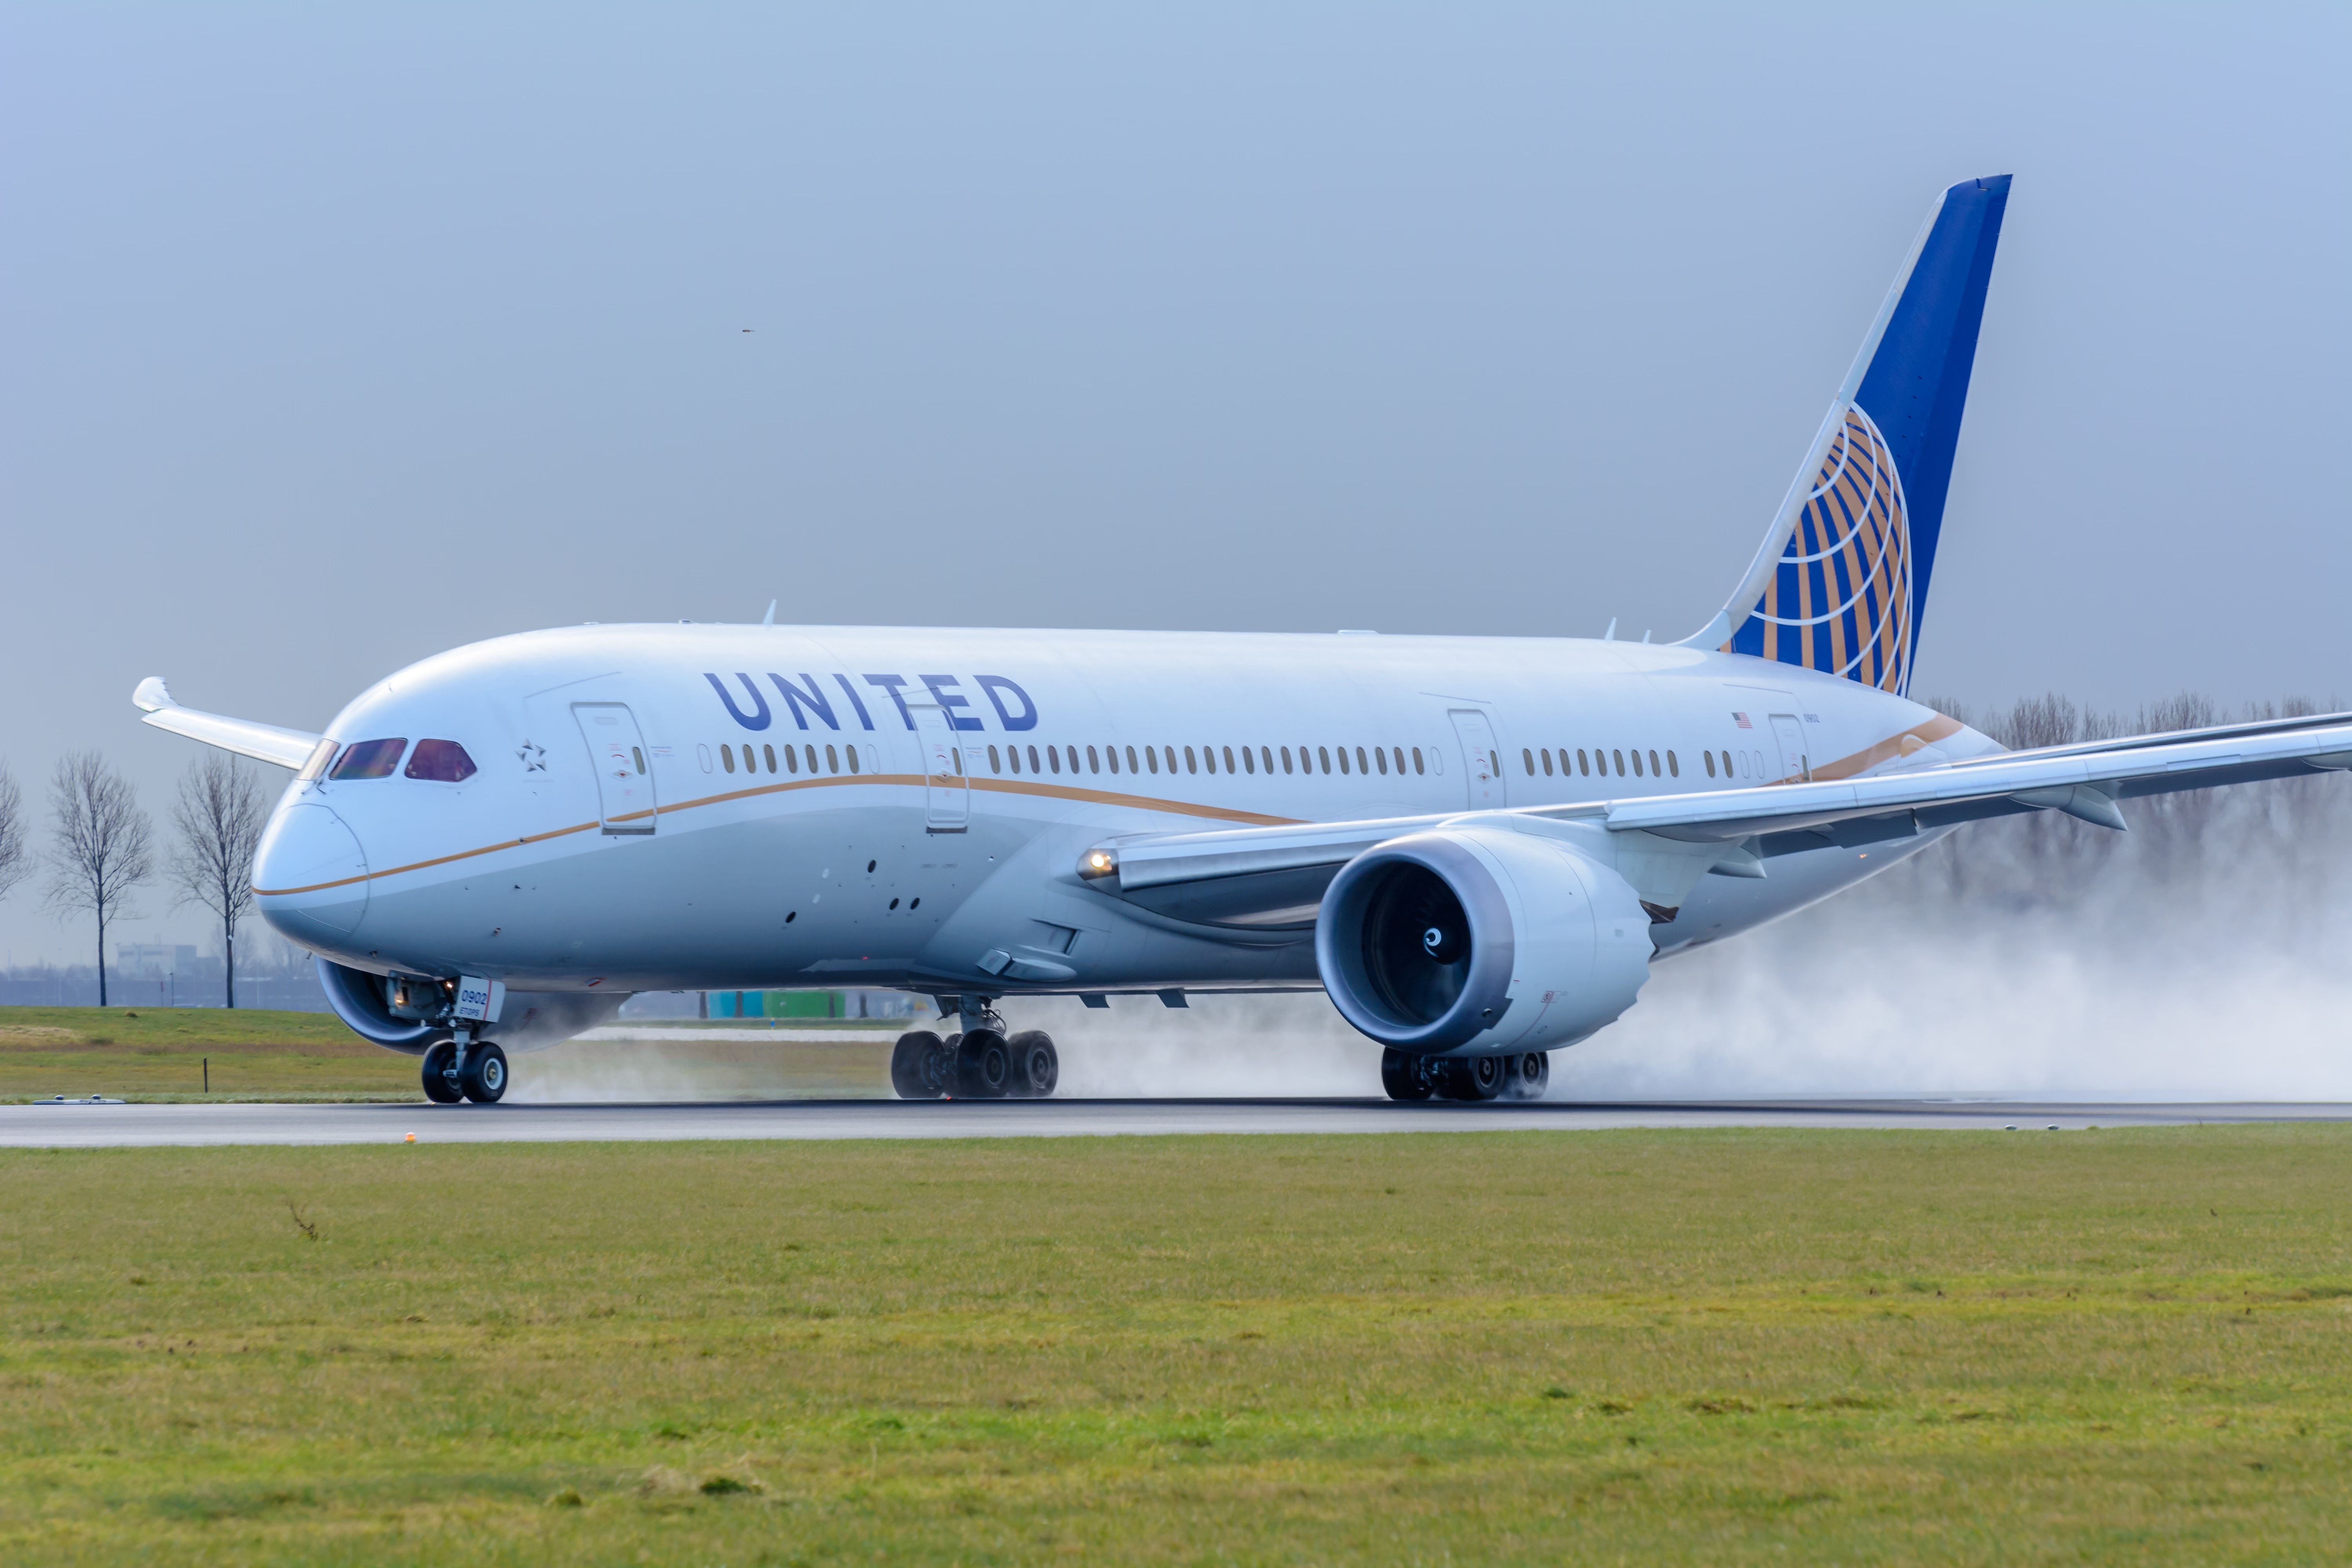 A United Airlines Boeing 787 just after landing.